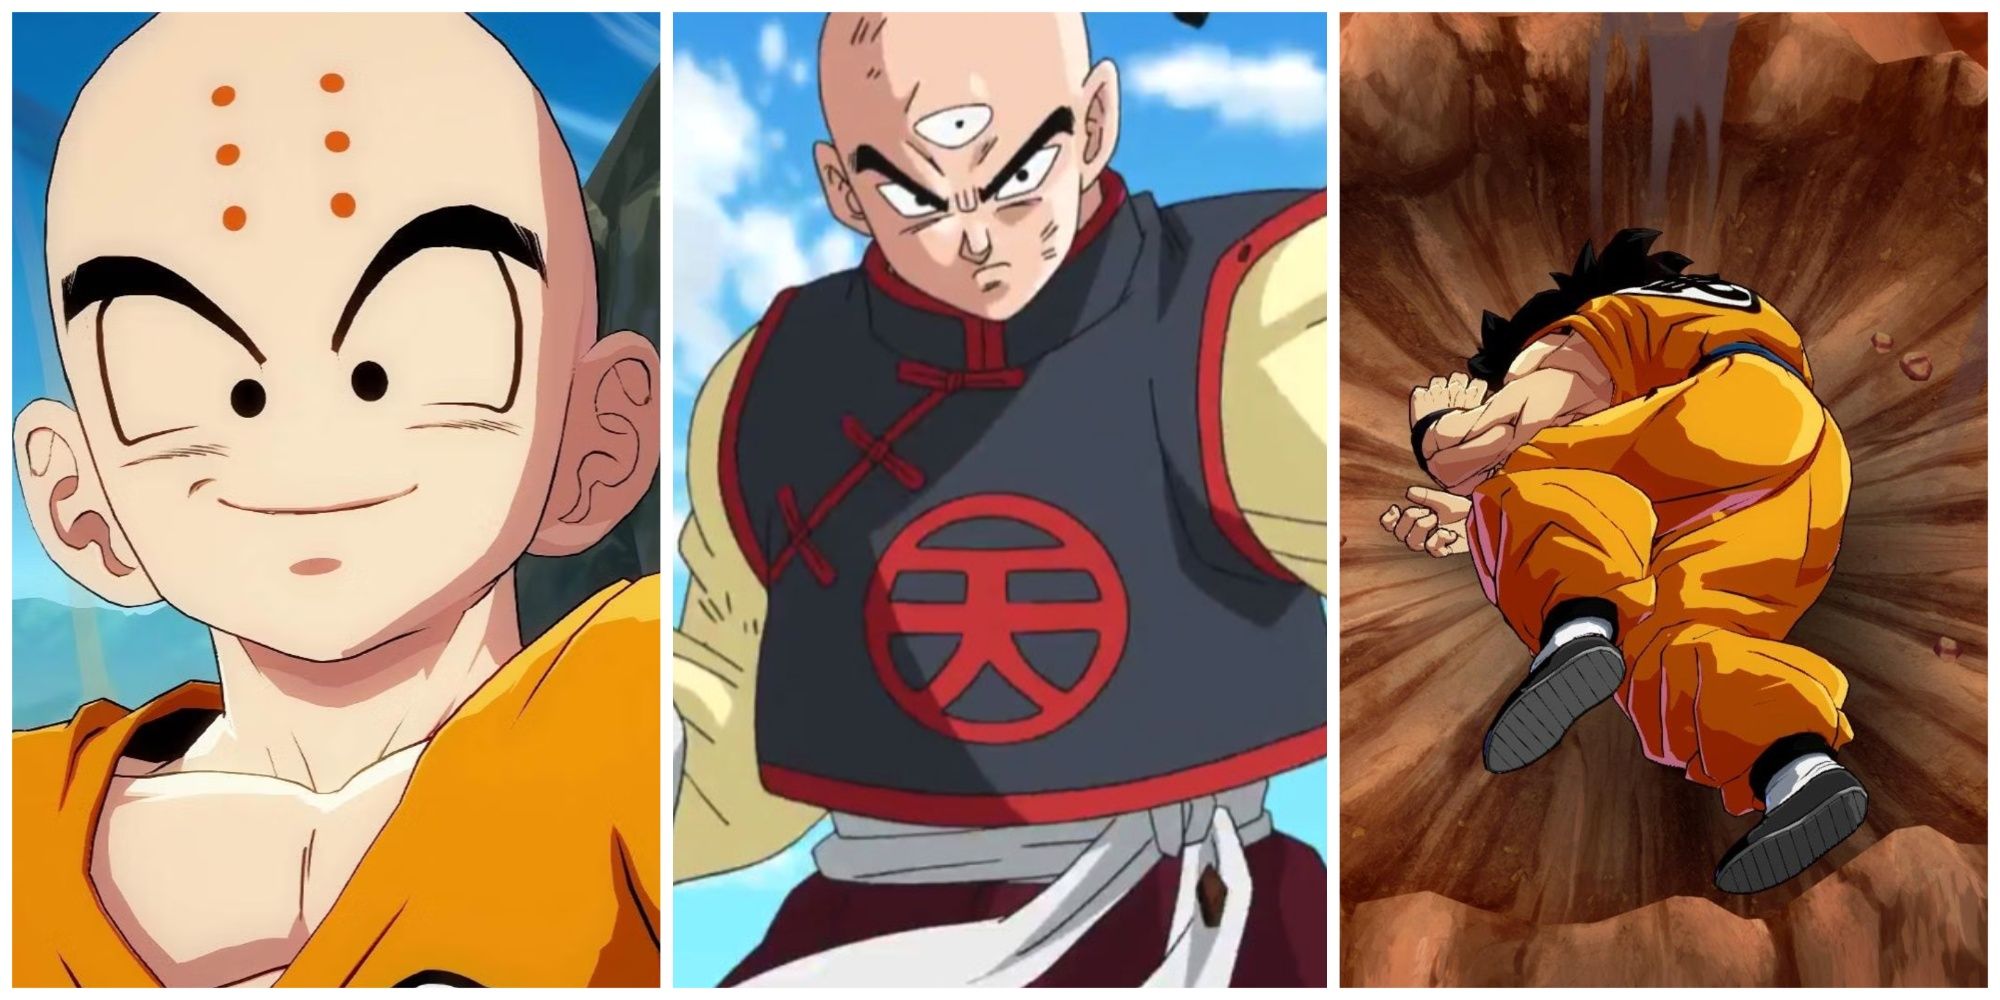 Collage of Dragon Ball Heroes: Krillin smiling; Tien mid-battle; Yamcha knocked out